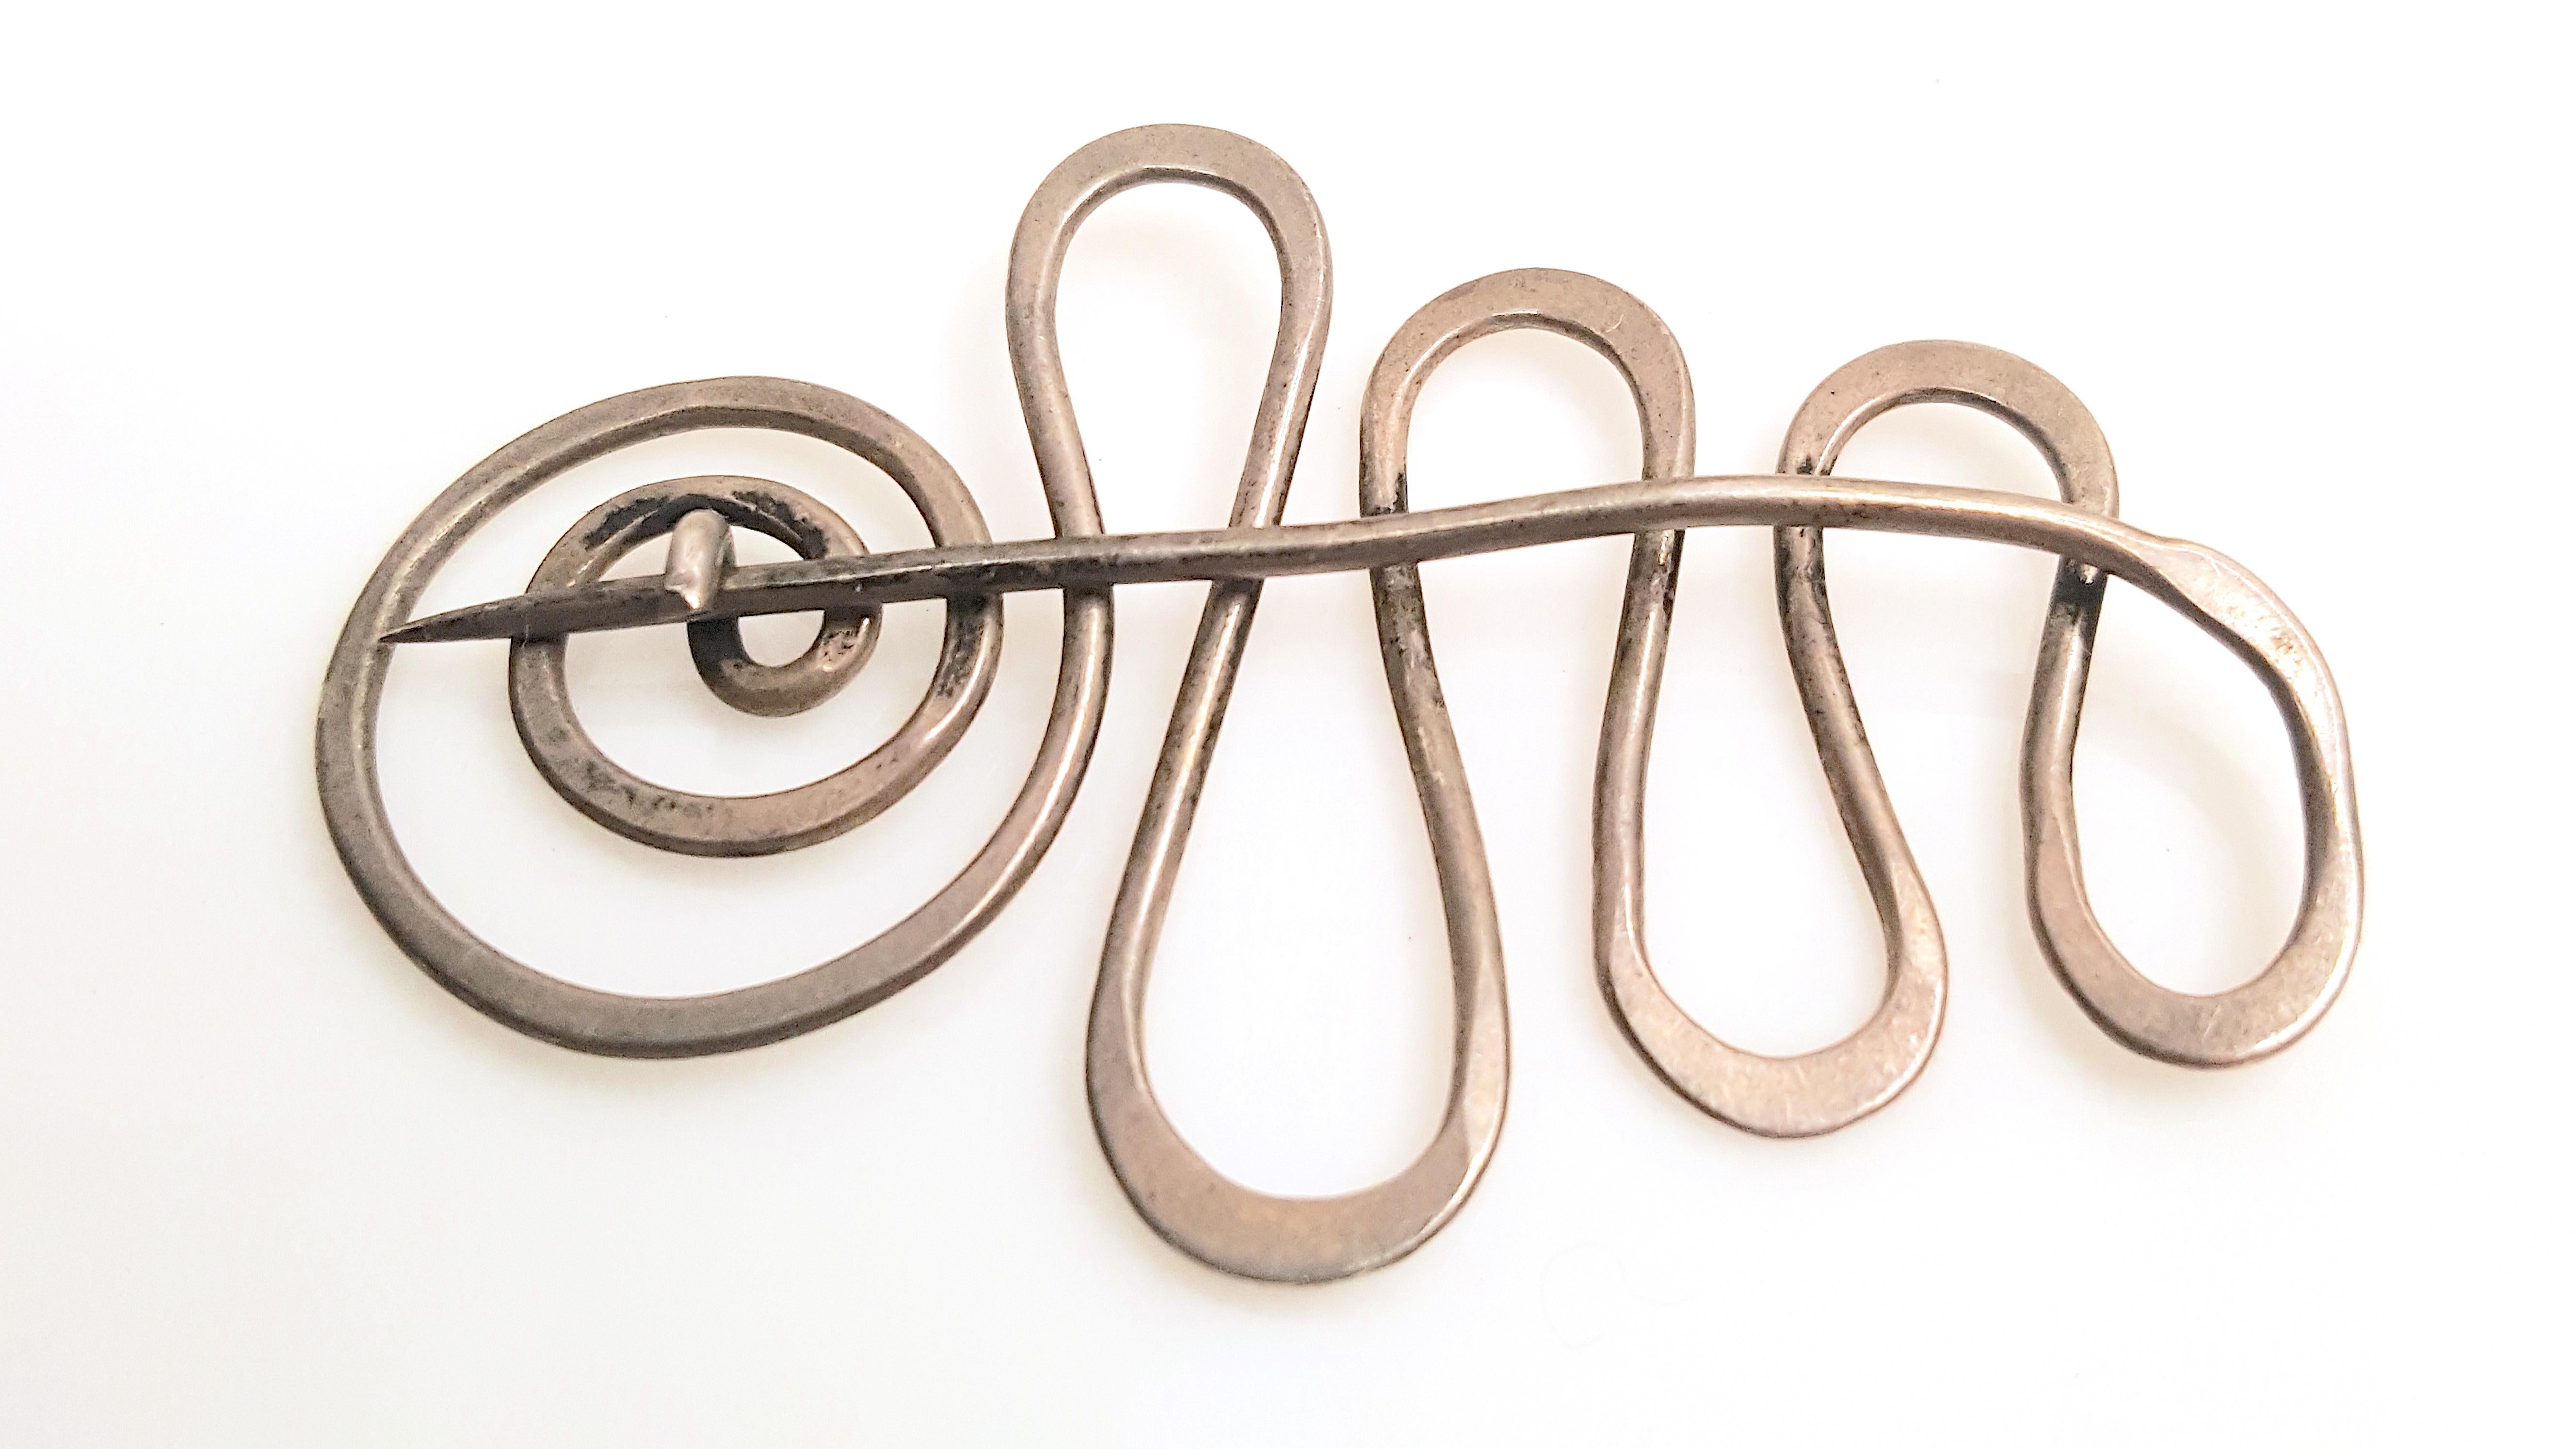 This modern mid-century abstract three-dimensional unsigned brooch is a single hand-hammered sterling-silver wire that was shaped by an artist into an undulating squiggle that ends in a spiral, which forms a c-clasp for self-closure while its other